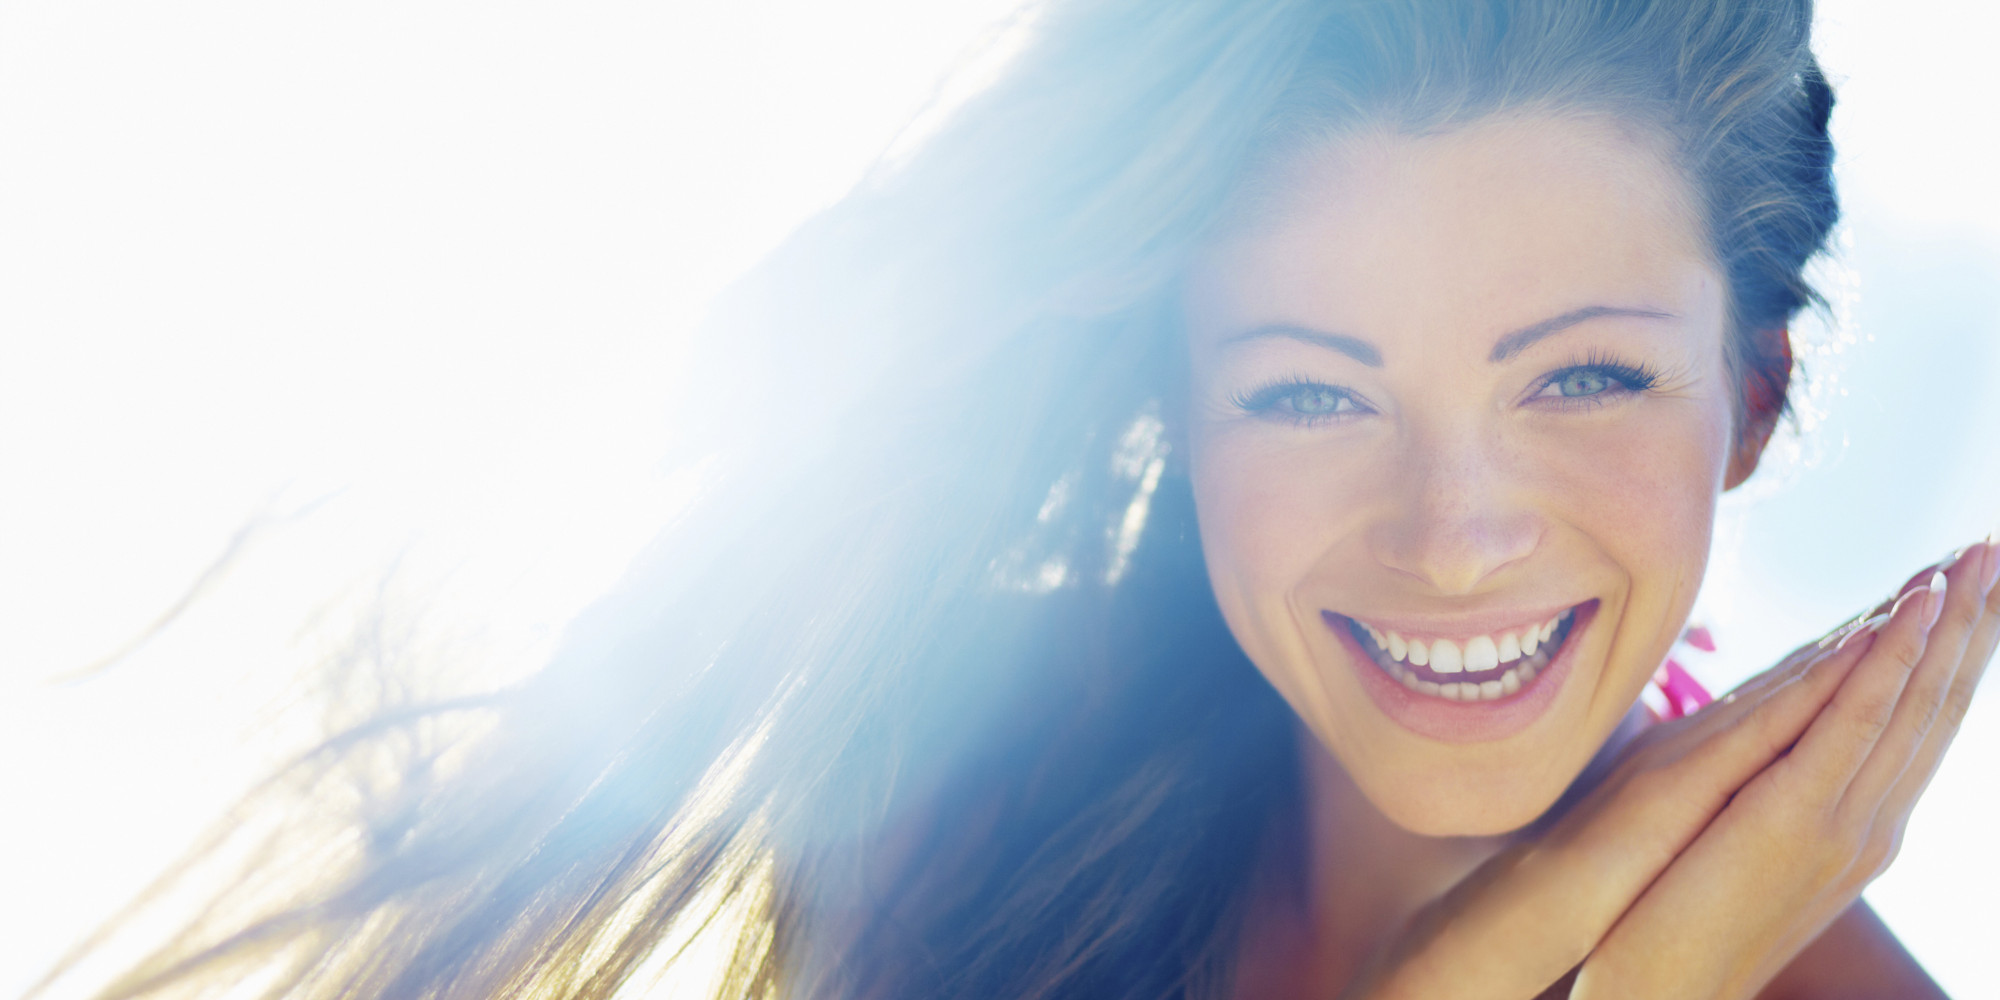 Smile! Our Greatest Tool to Influence Ourselves and Others | HuffPost